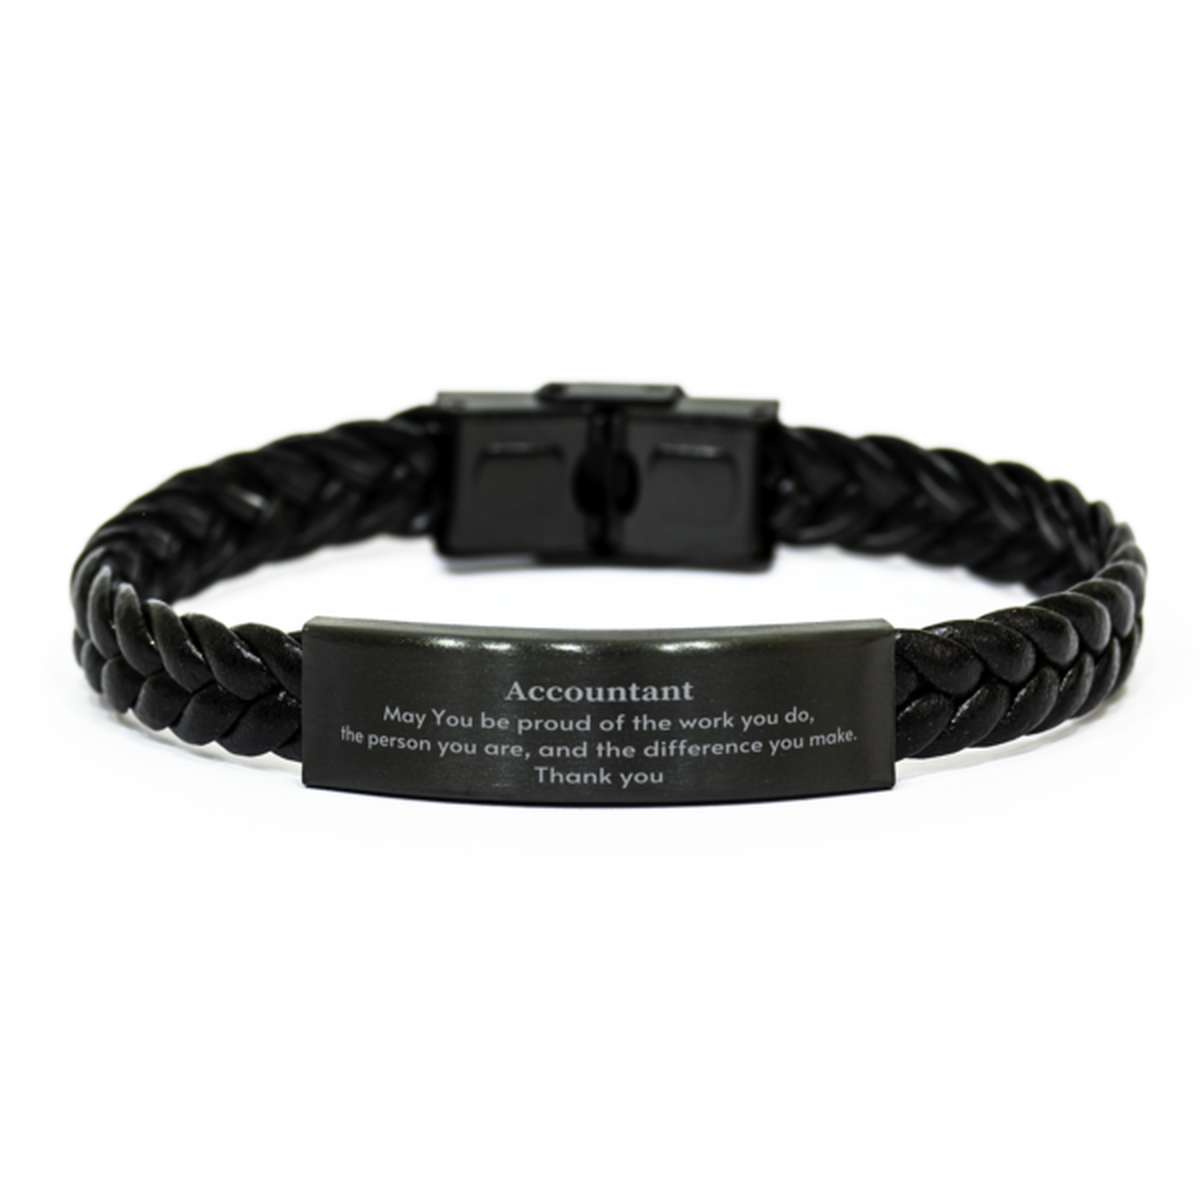 Heartwarming Braided Leather Bracelet Retirement Coworkers Gifts for Accountant, Accountant May You be proud of the work you do, the person you are Gifts for Boss Men Women Friends